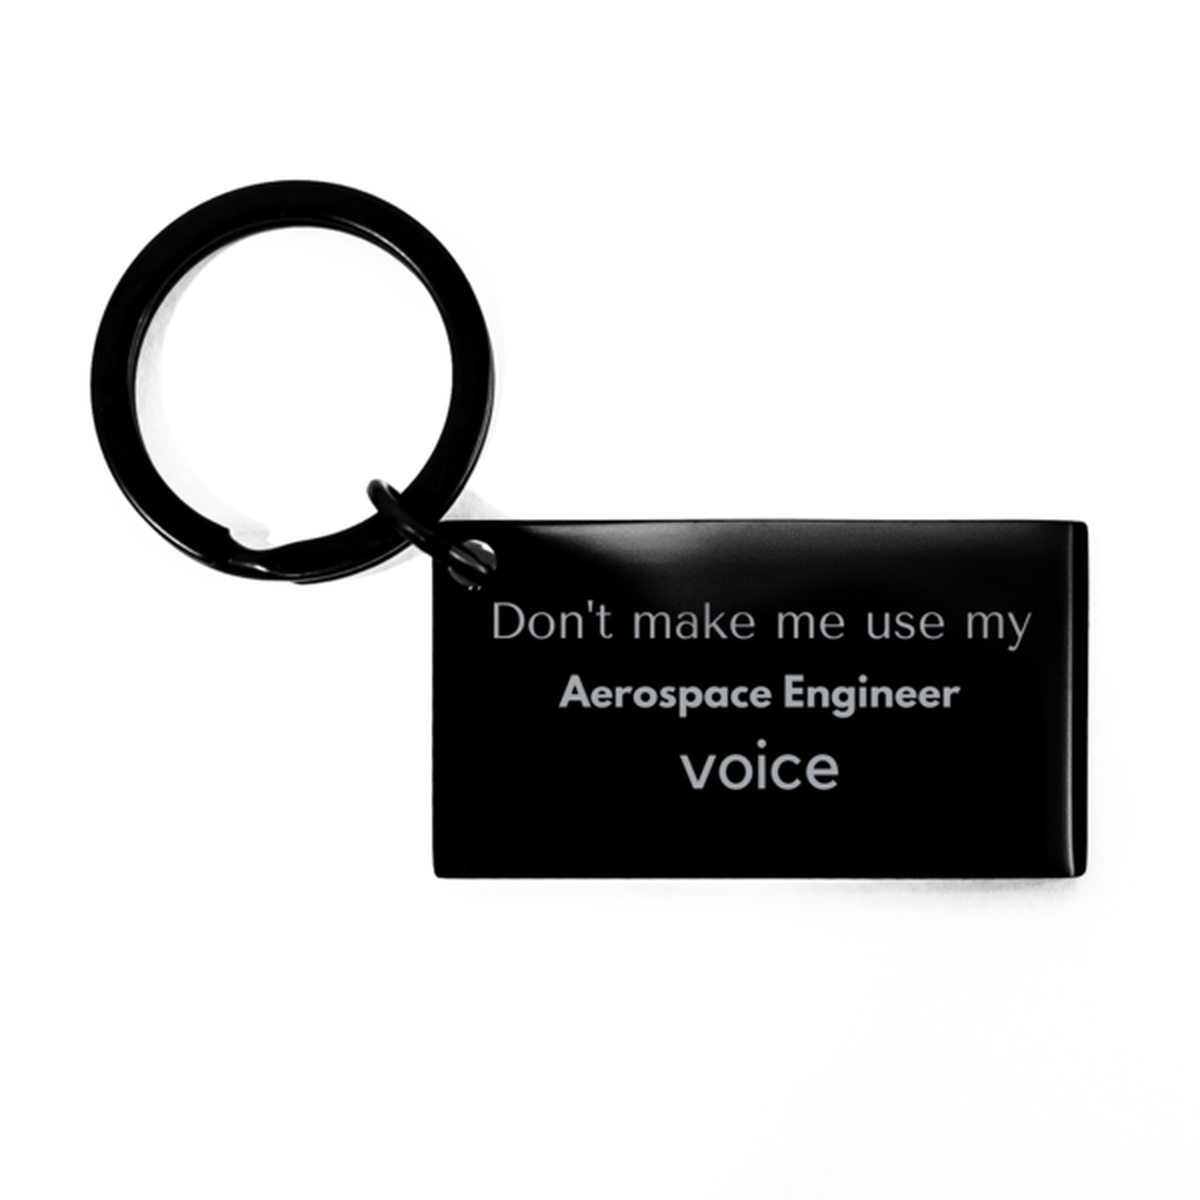 Don't make me use my Aerospace Engineer voice, Sarcasm Aerospace Engineer Gifts, Christmas Aerospace Engineer Keychain Birthday Unique Gifts For Aerospace Engineer Coworkers, Men, Women, Colleague, Friends